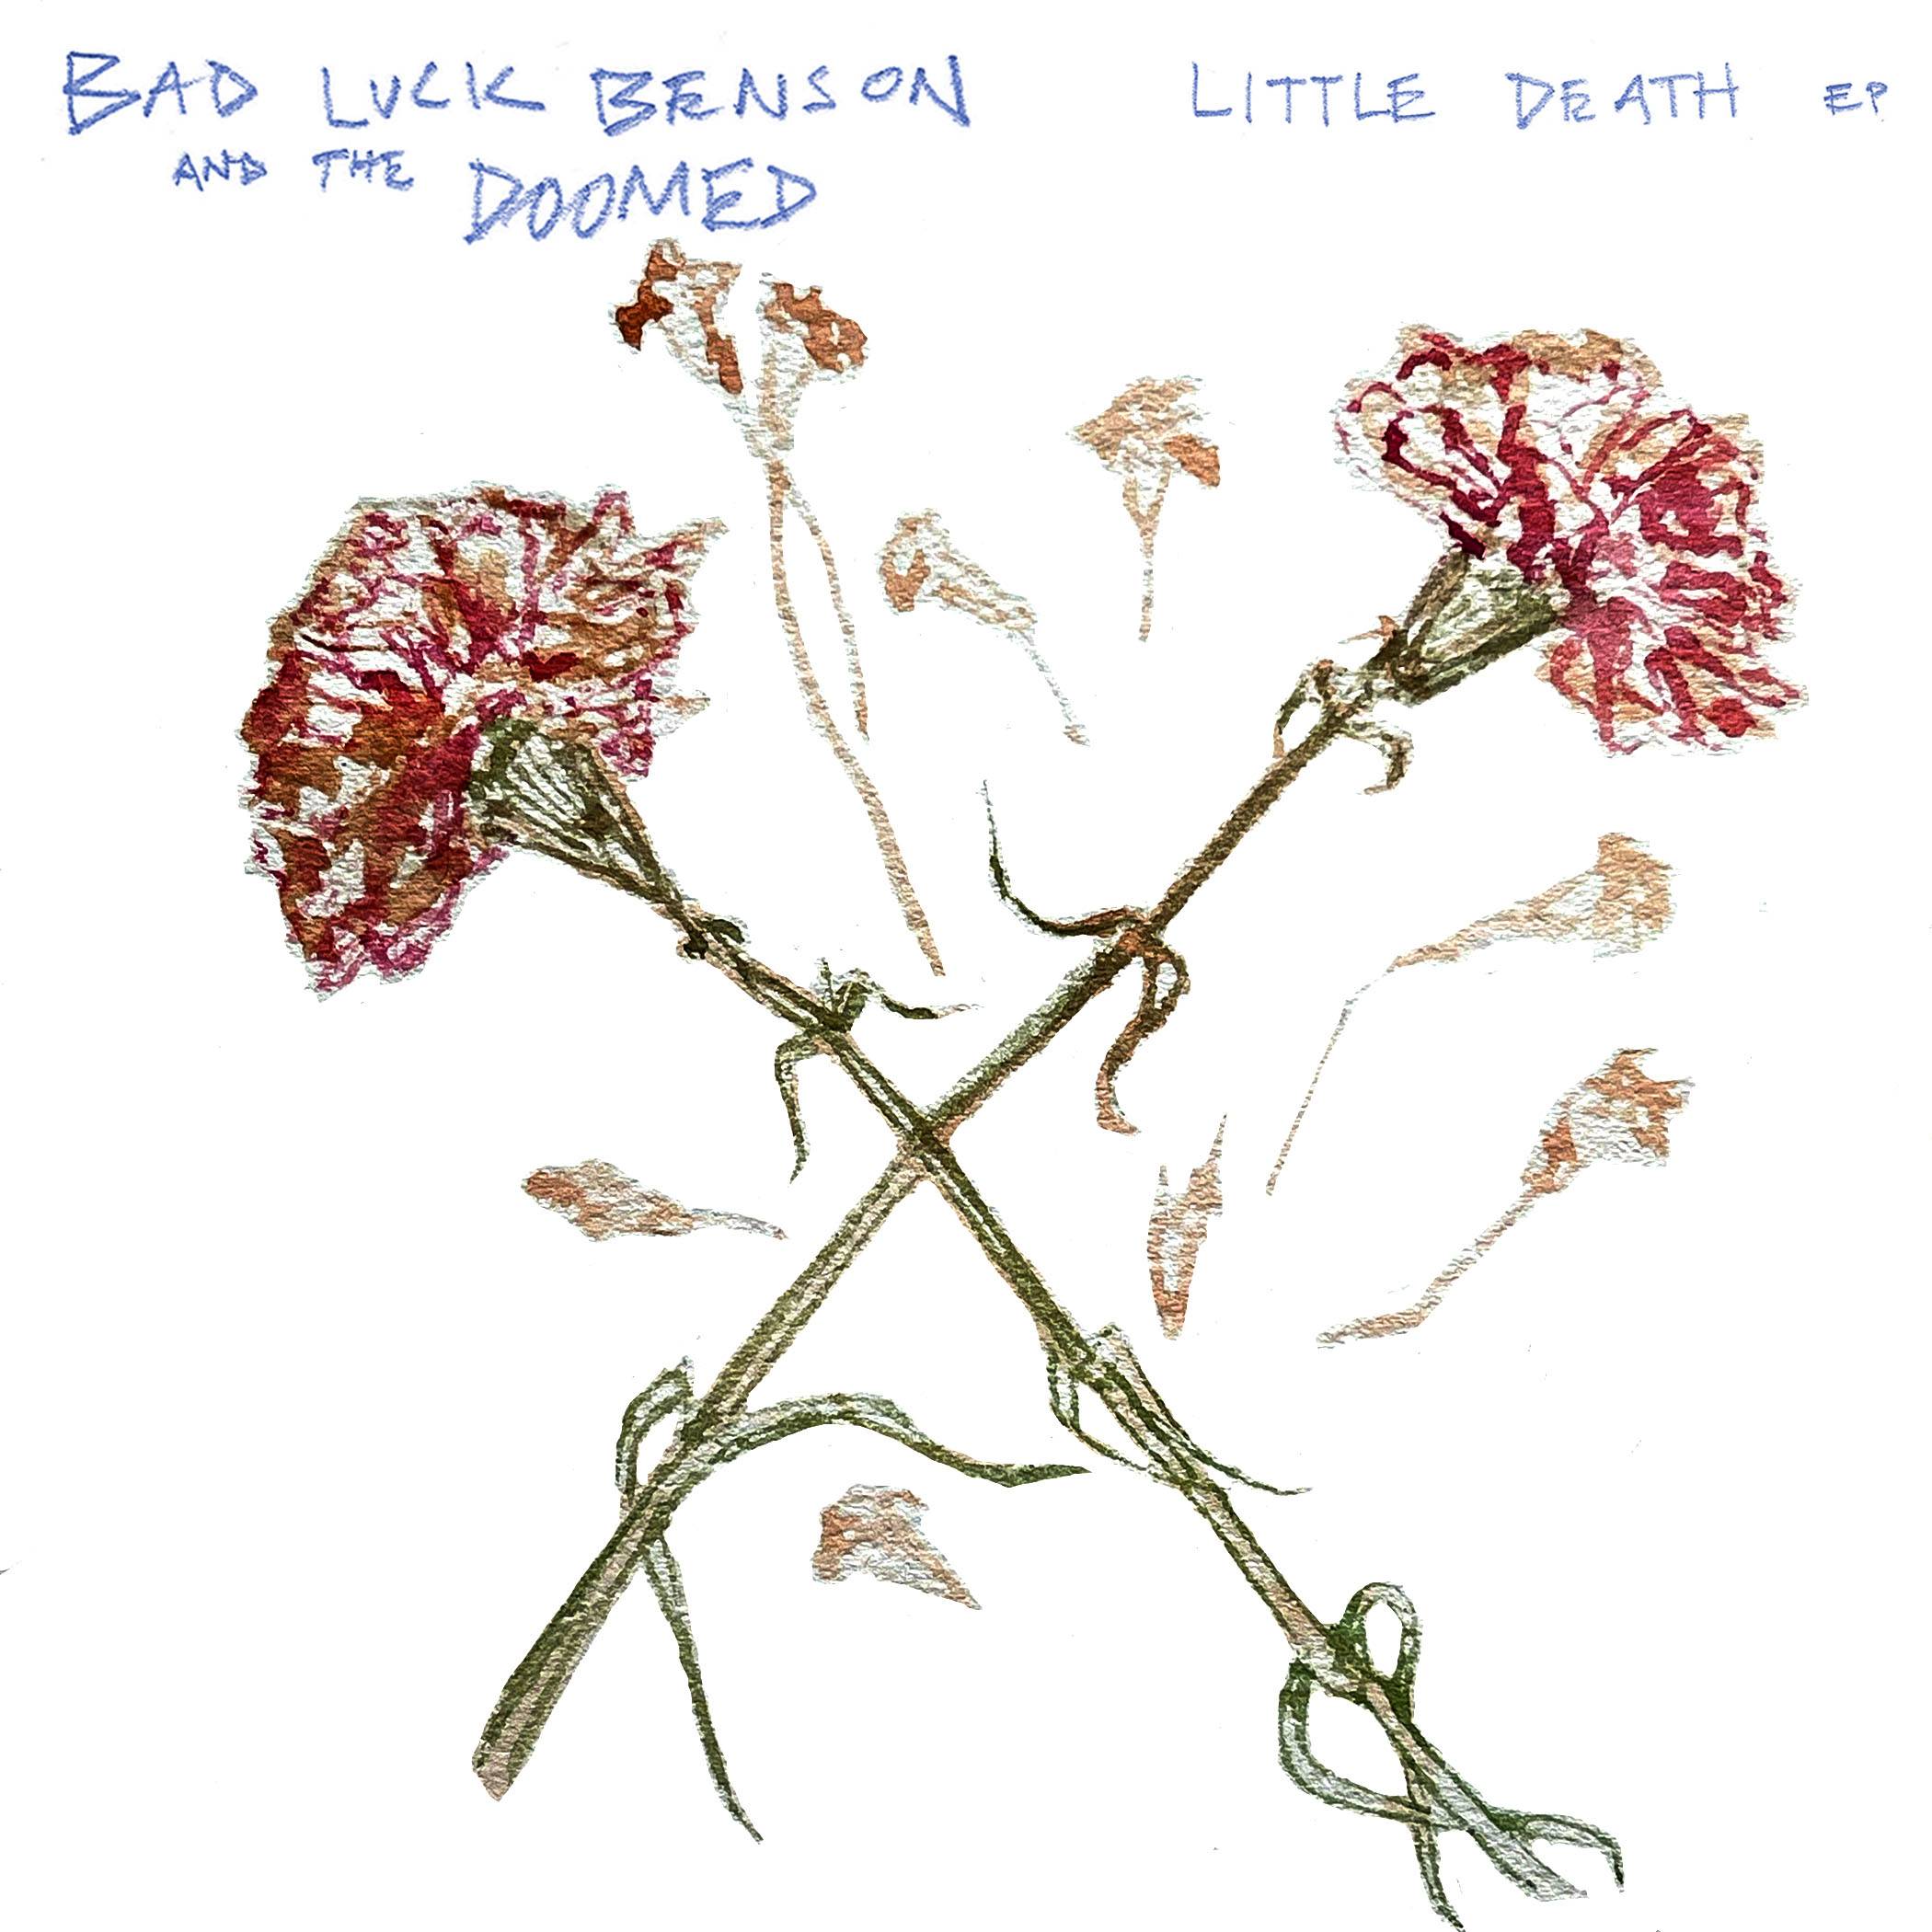 Little Death EP OUT NOW